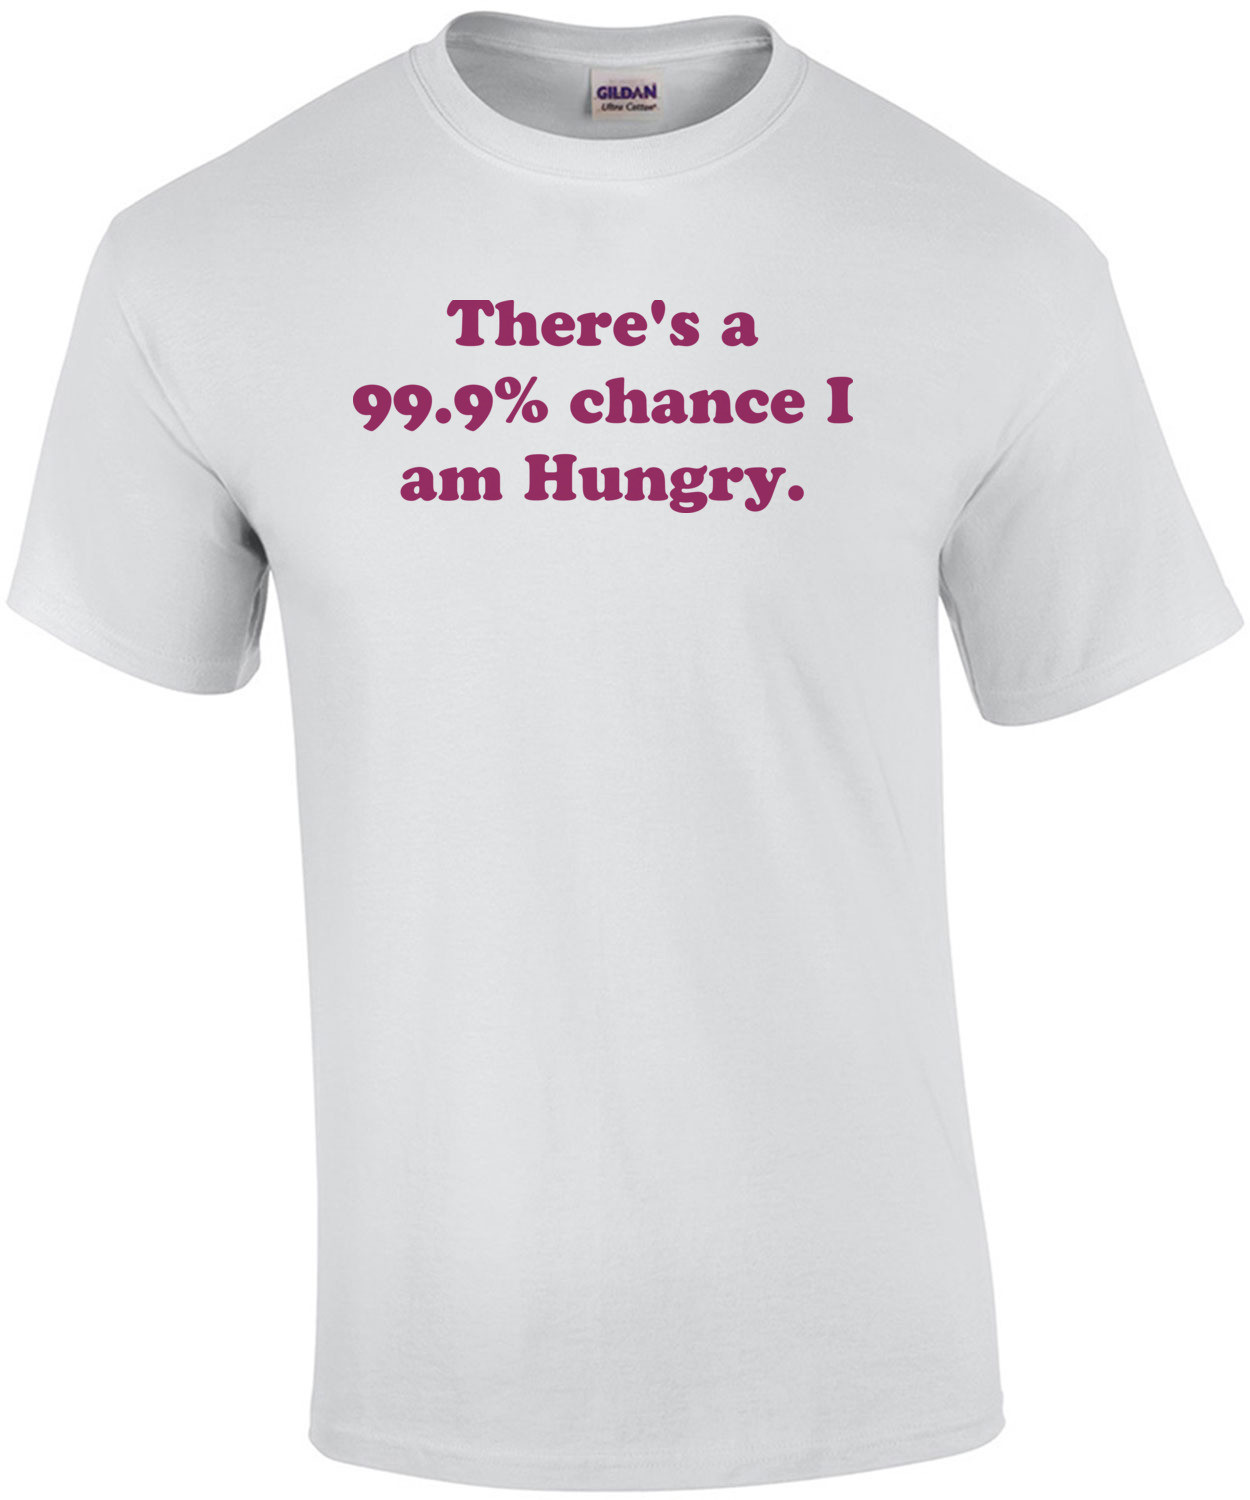 There's a 99.9% chance I am Hungry. T-Shirt